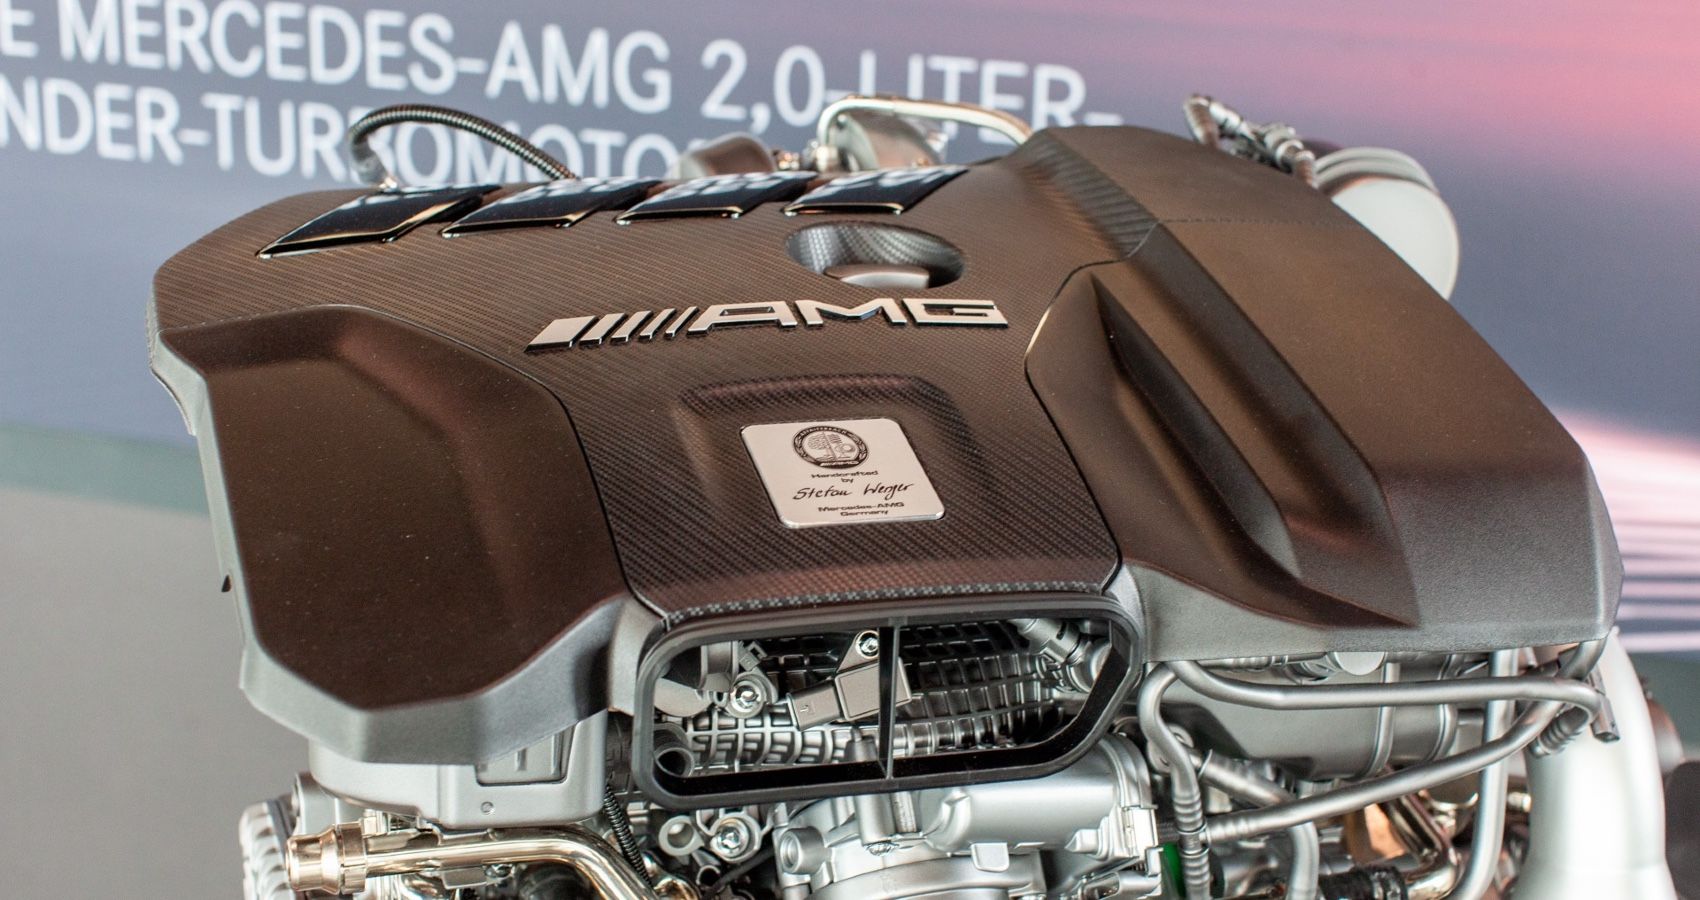 Mercedes M139 engine at display during its unveil